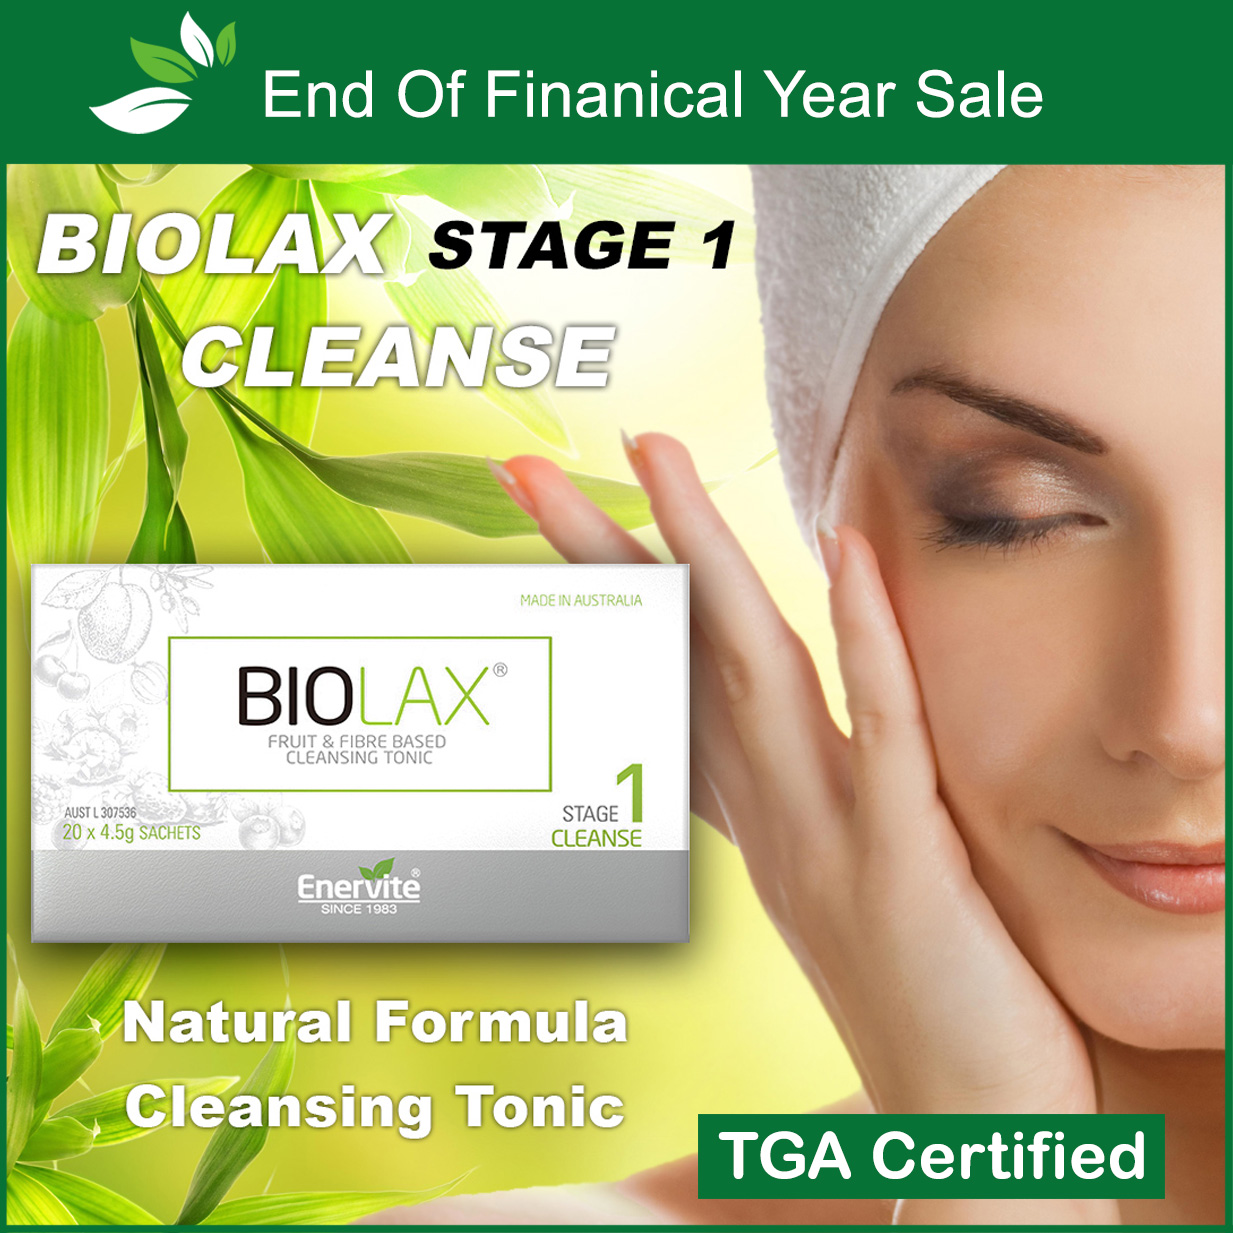 End of Financial Year Biolax Stage 1 Cleanse On Sale